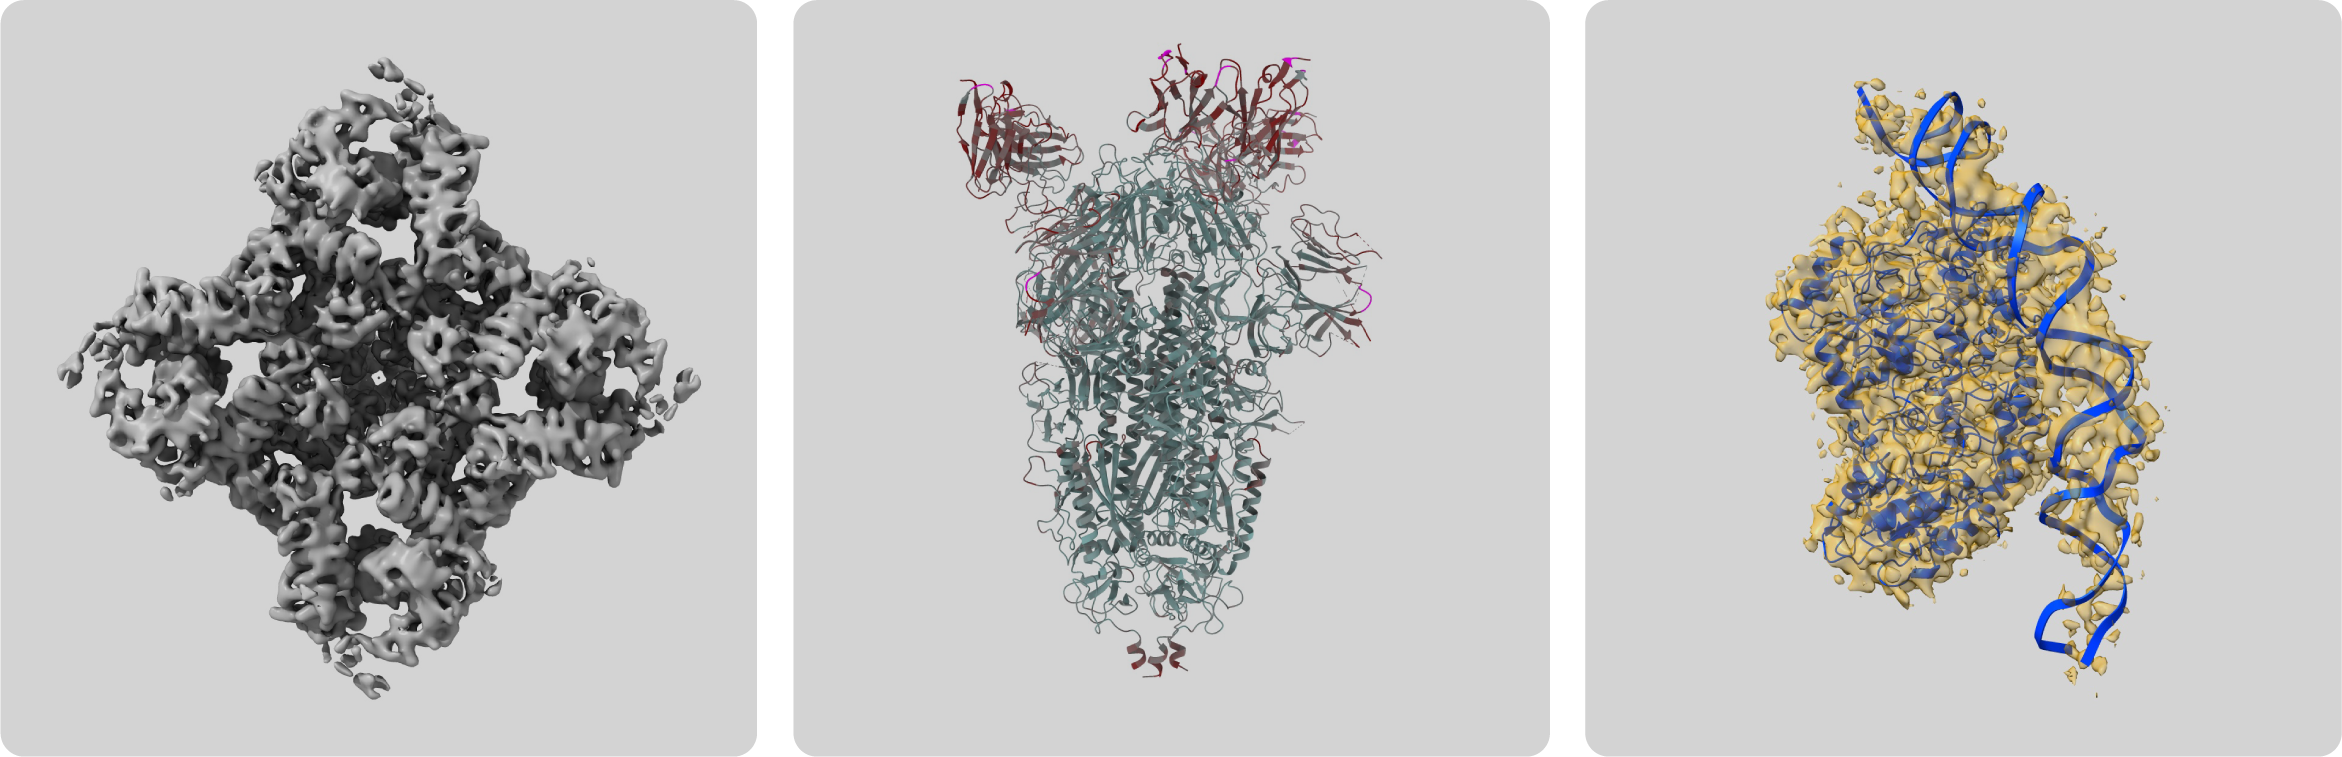 Examples of cryo-EM 3D reconstructions on the EMDB public repository